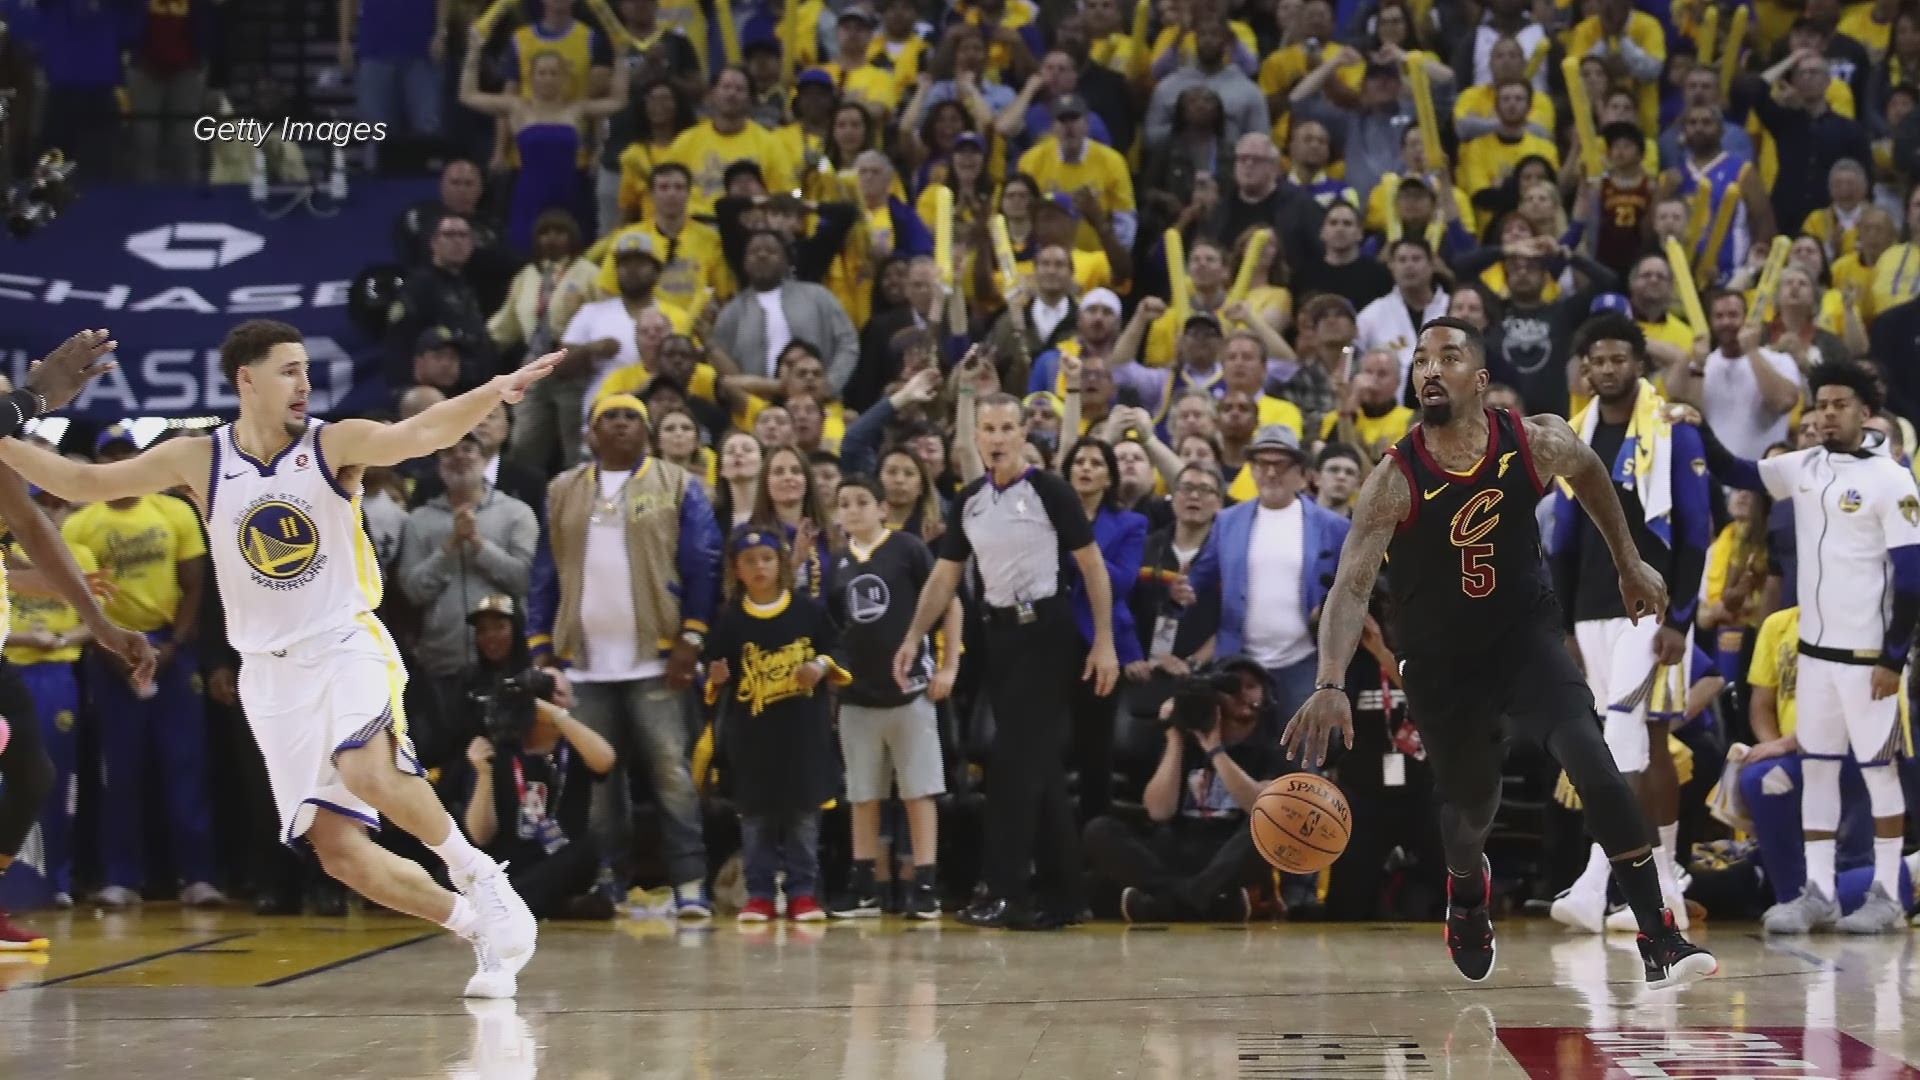 The jersey JR Smith wore in Game 1 of the NBA Finals is for sale